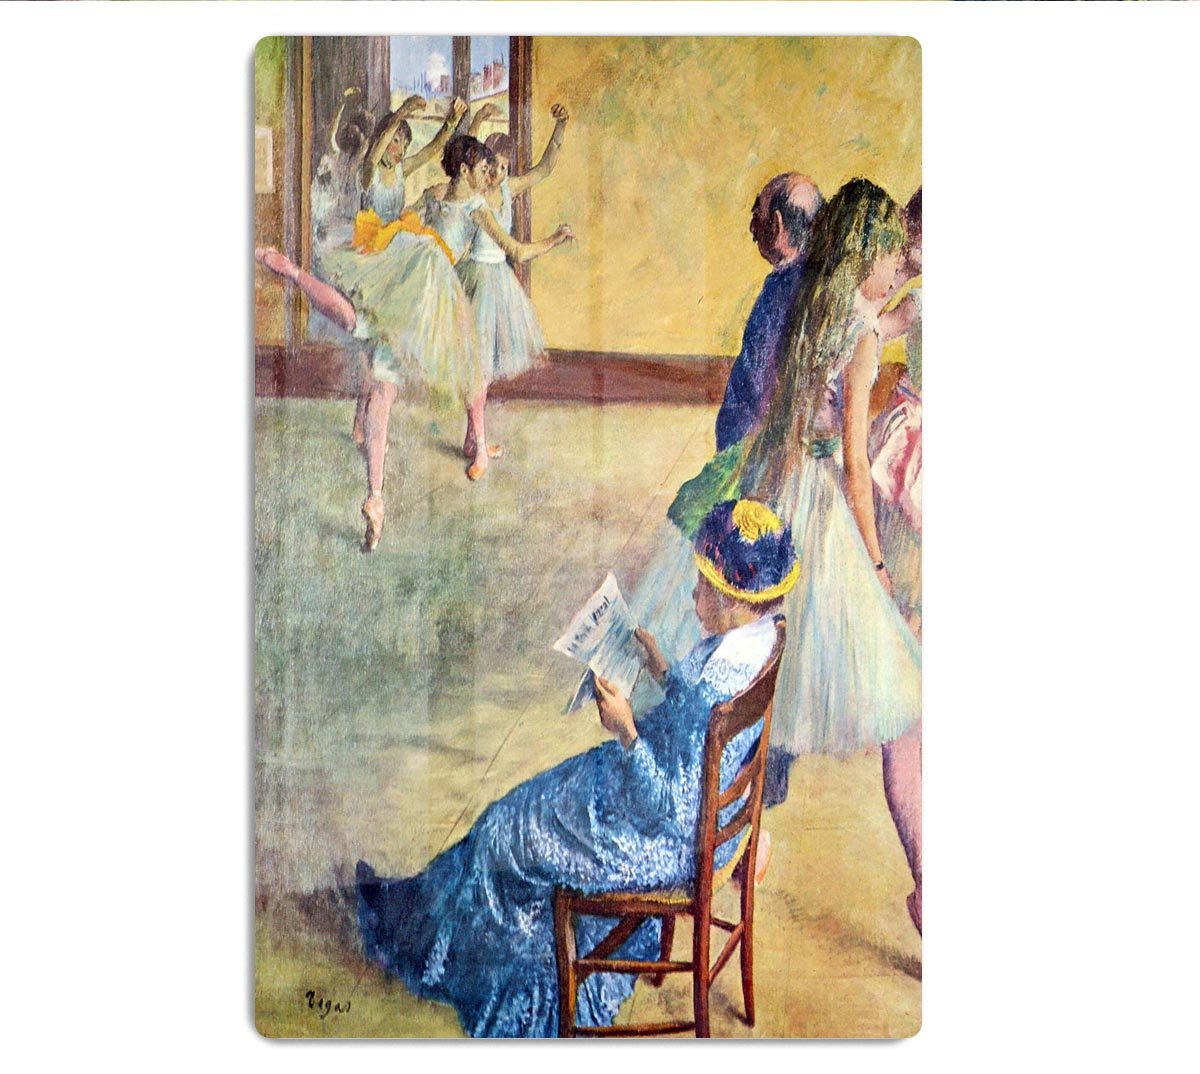 During the dance lessons Madame Cardinal by Degas HD Metal Print - Canvas Art Rocks - 1